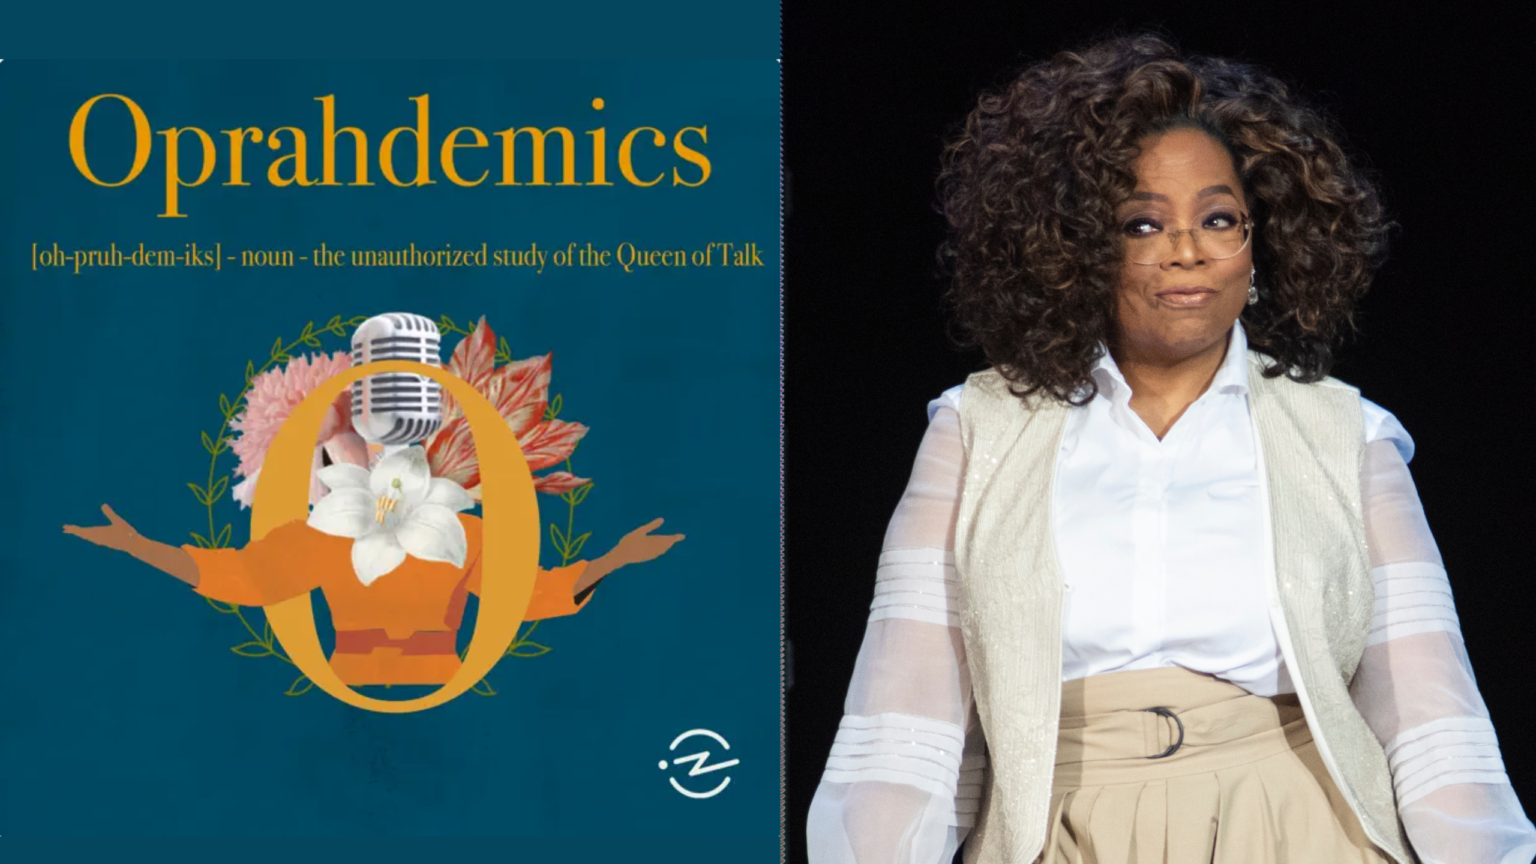 Sister Oprah Brings Lawsuit Against Unauthorized Podcast Called “Oprahdemics”